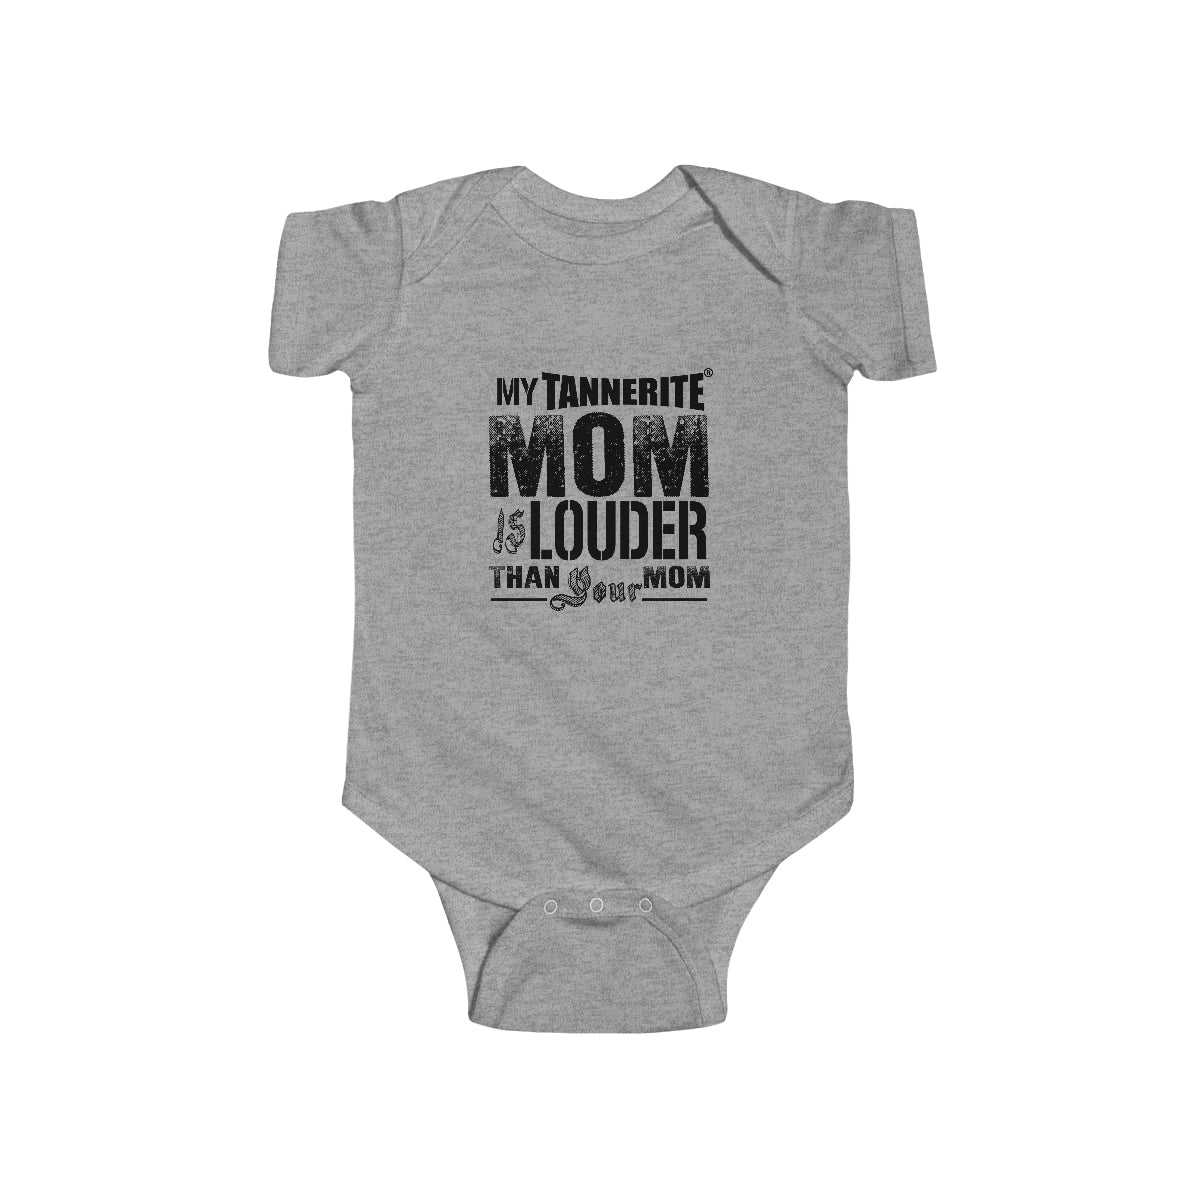 My Tannerite® Mom is Louder Than Your Mom - Infant Fine Jersey Bodysuit